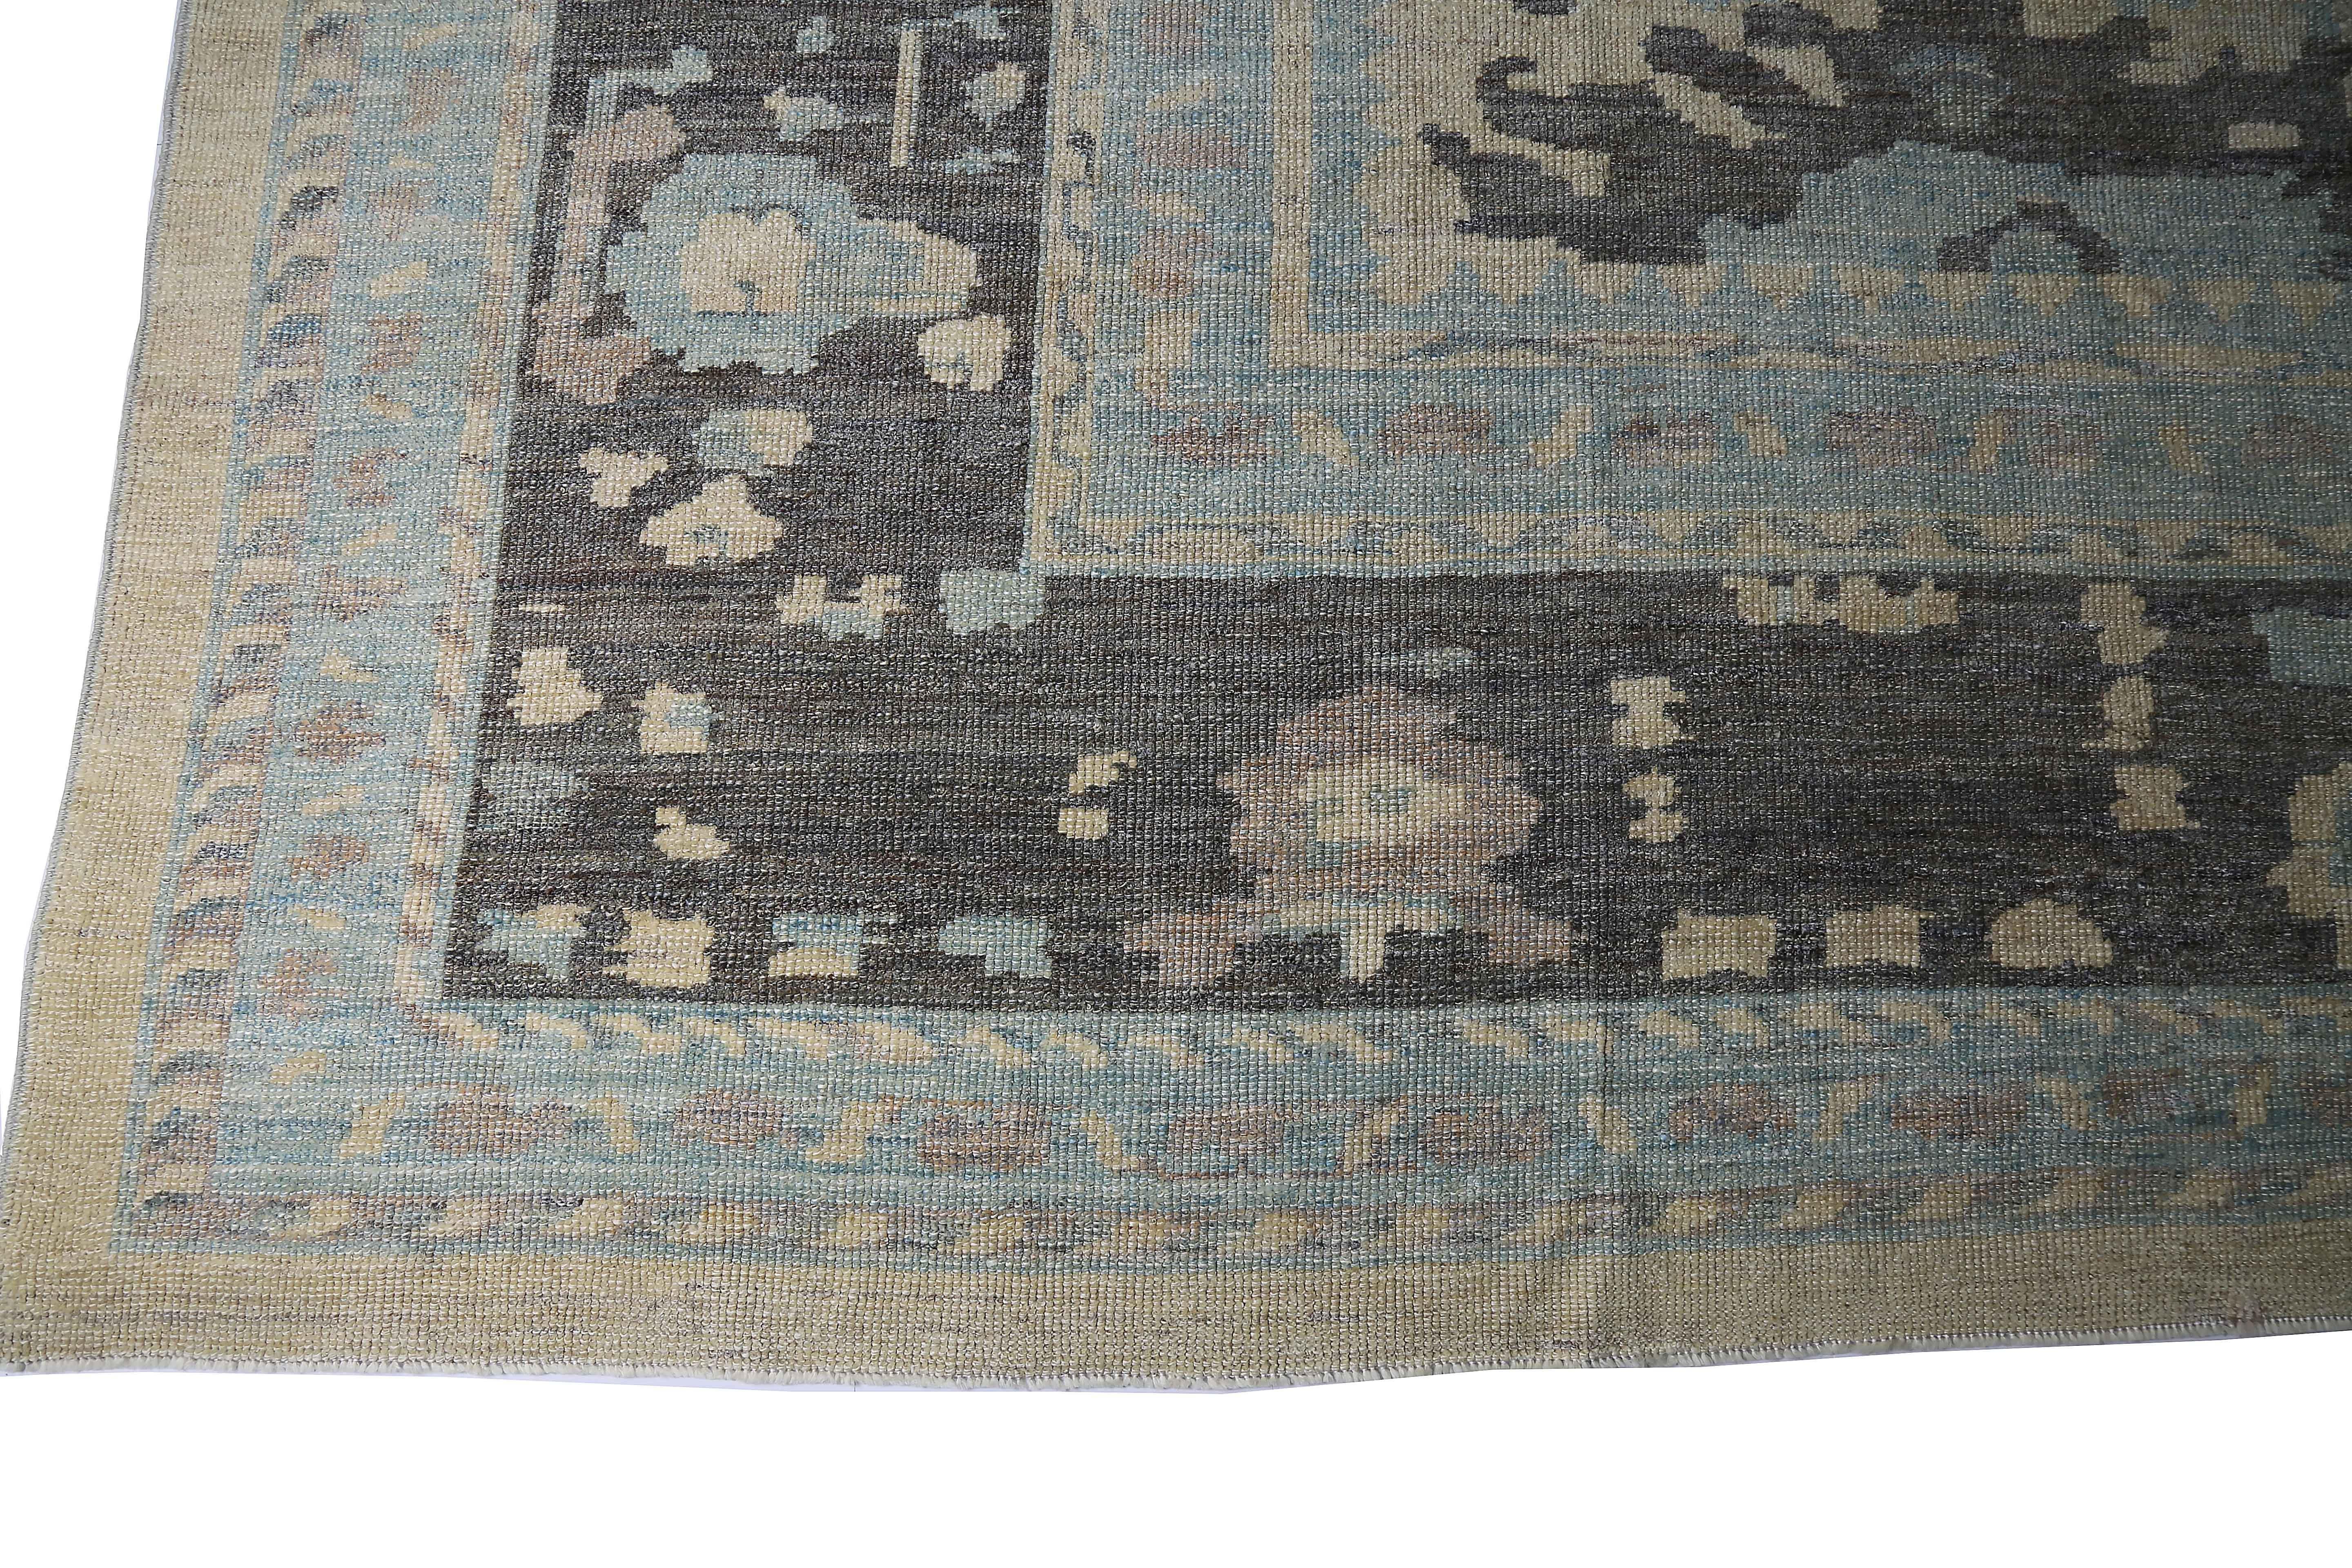 Contemporary Persian Oushak Style Rug with Blue and Gray Floral Details on Beige Centerfield For Sale